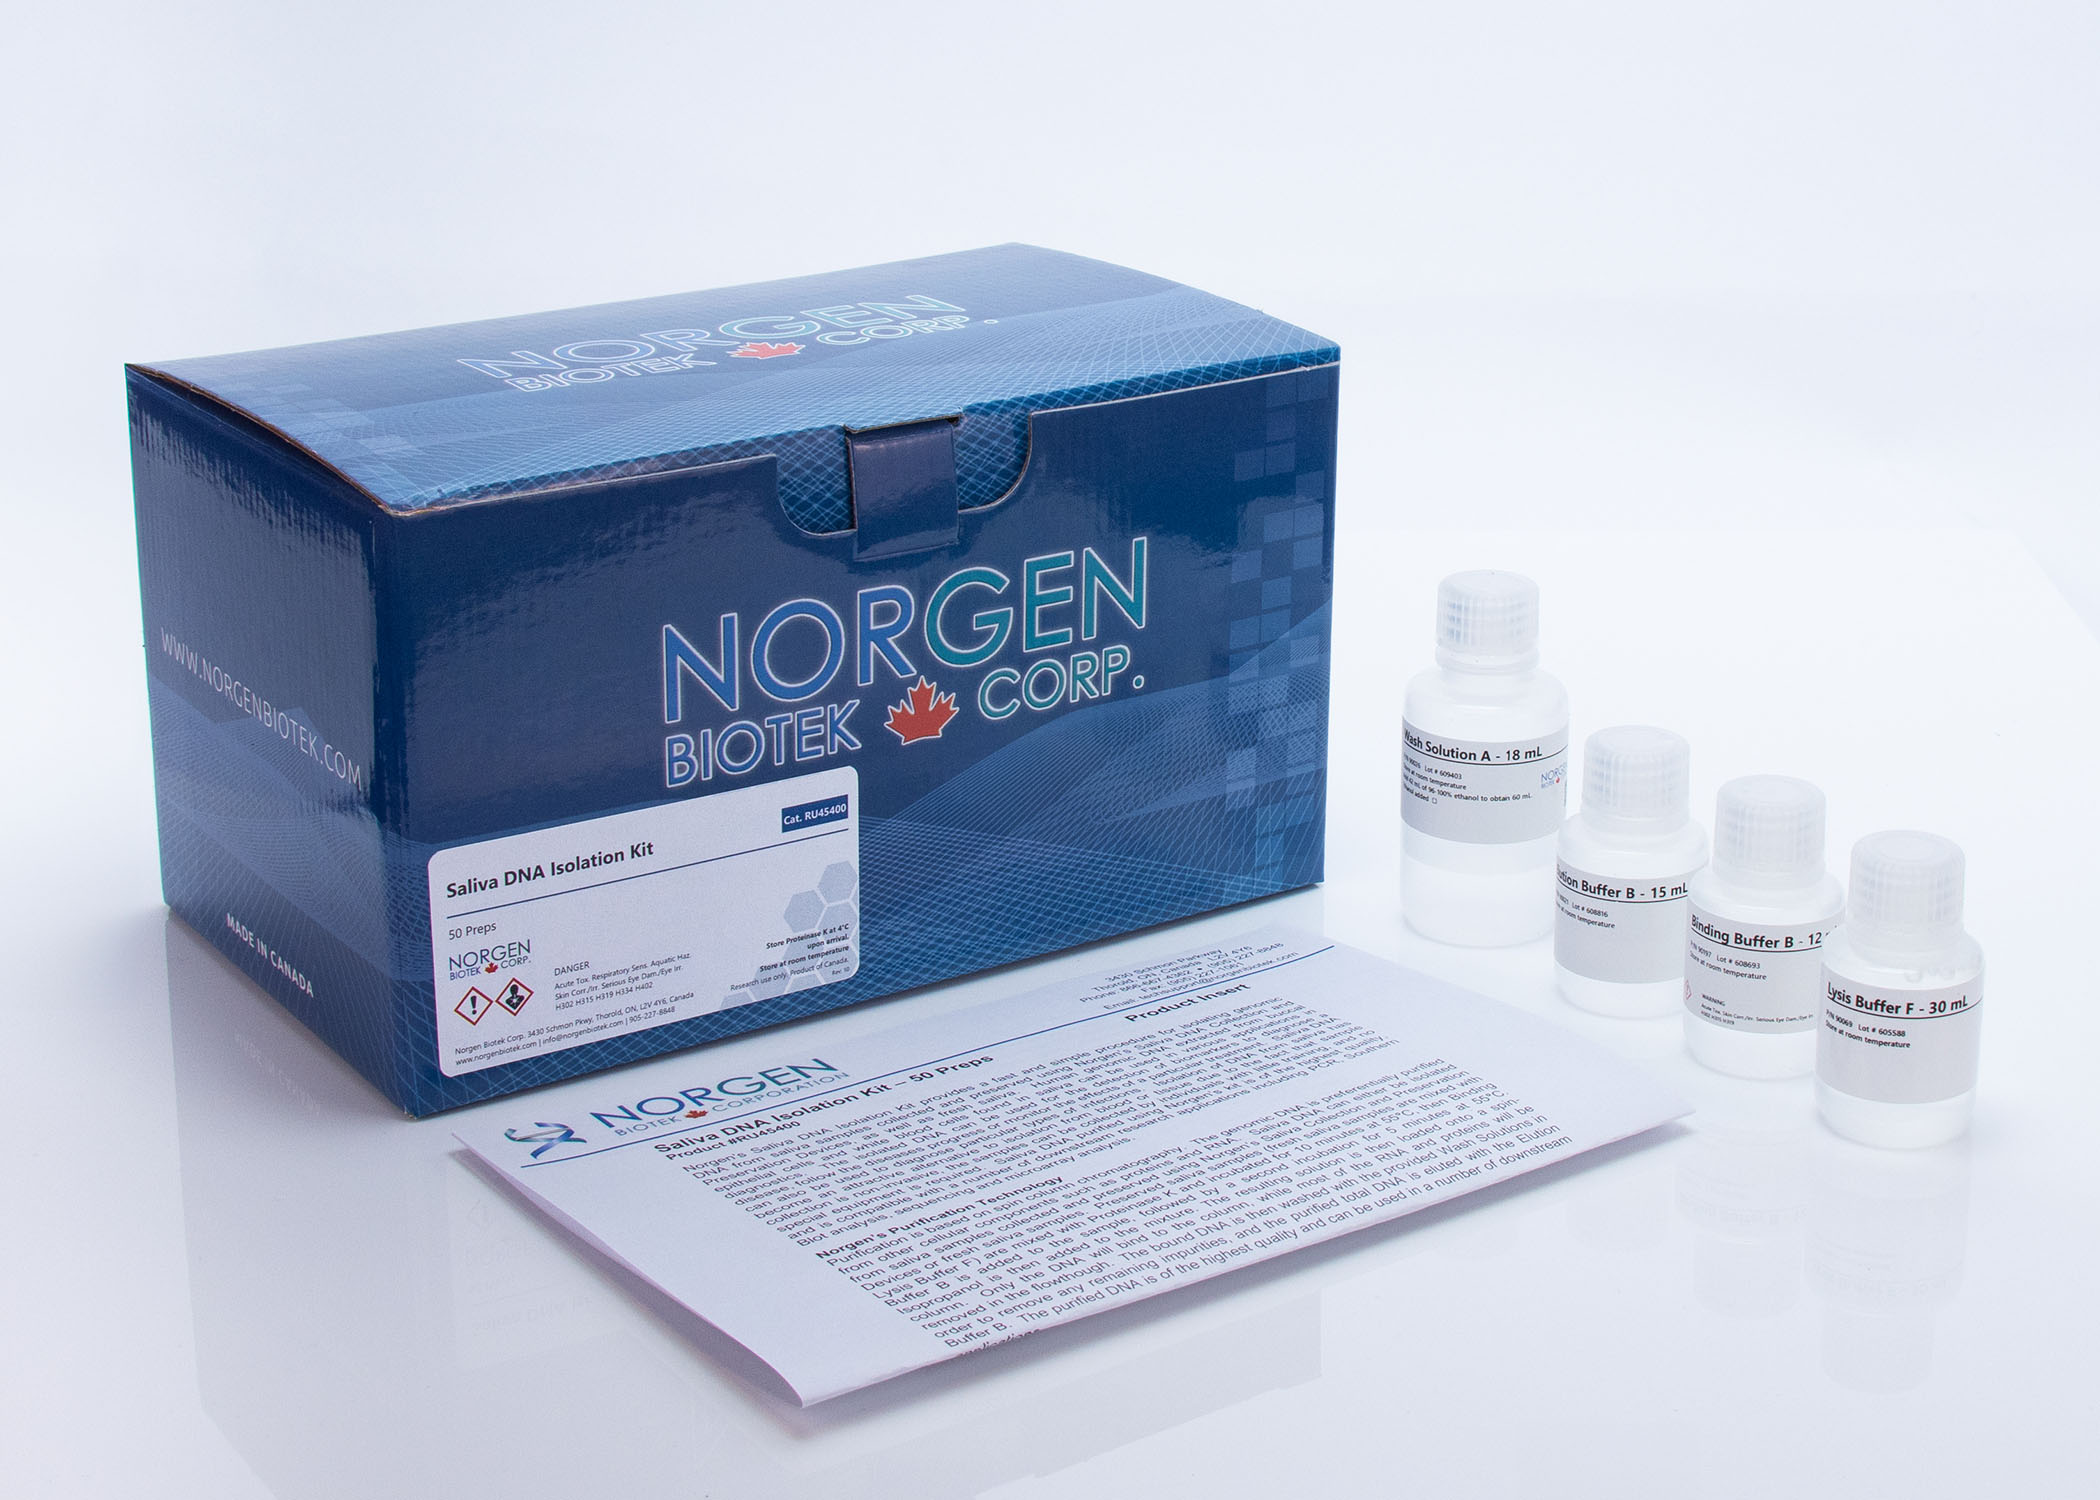 Saliva DNA Isolation Kit and Components